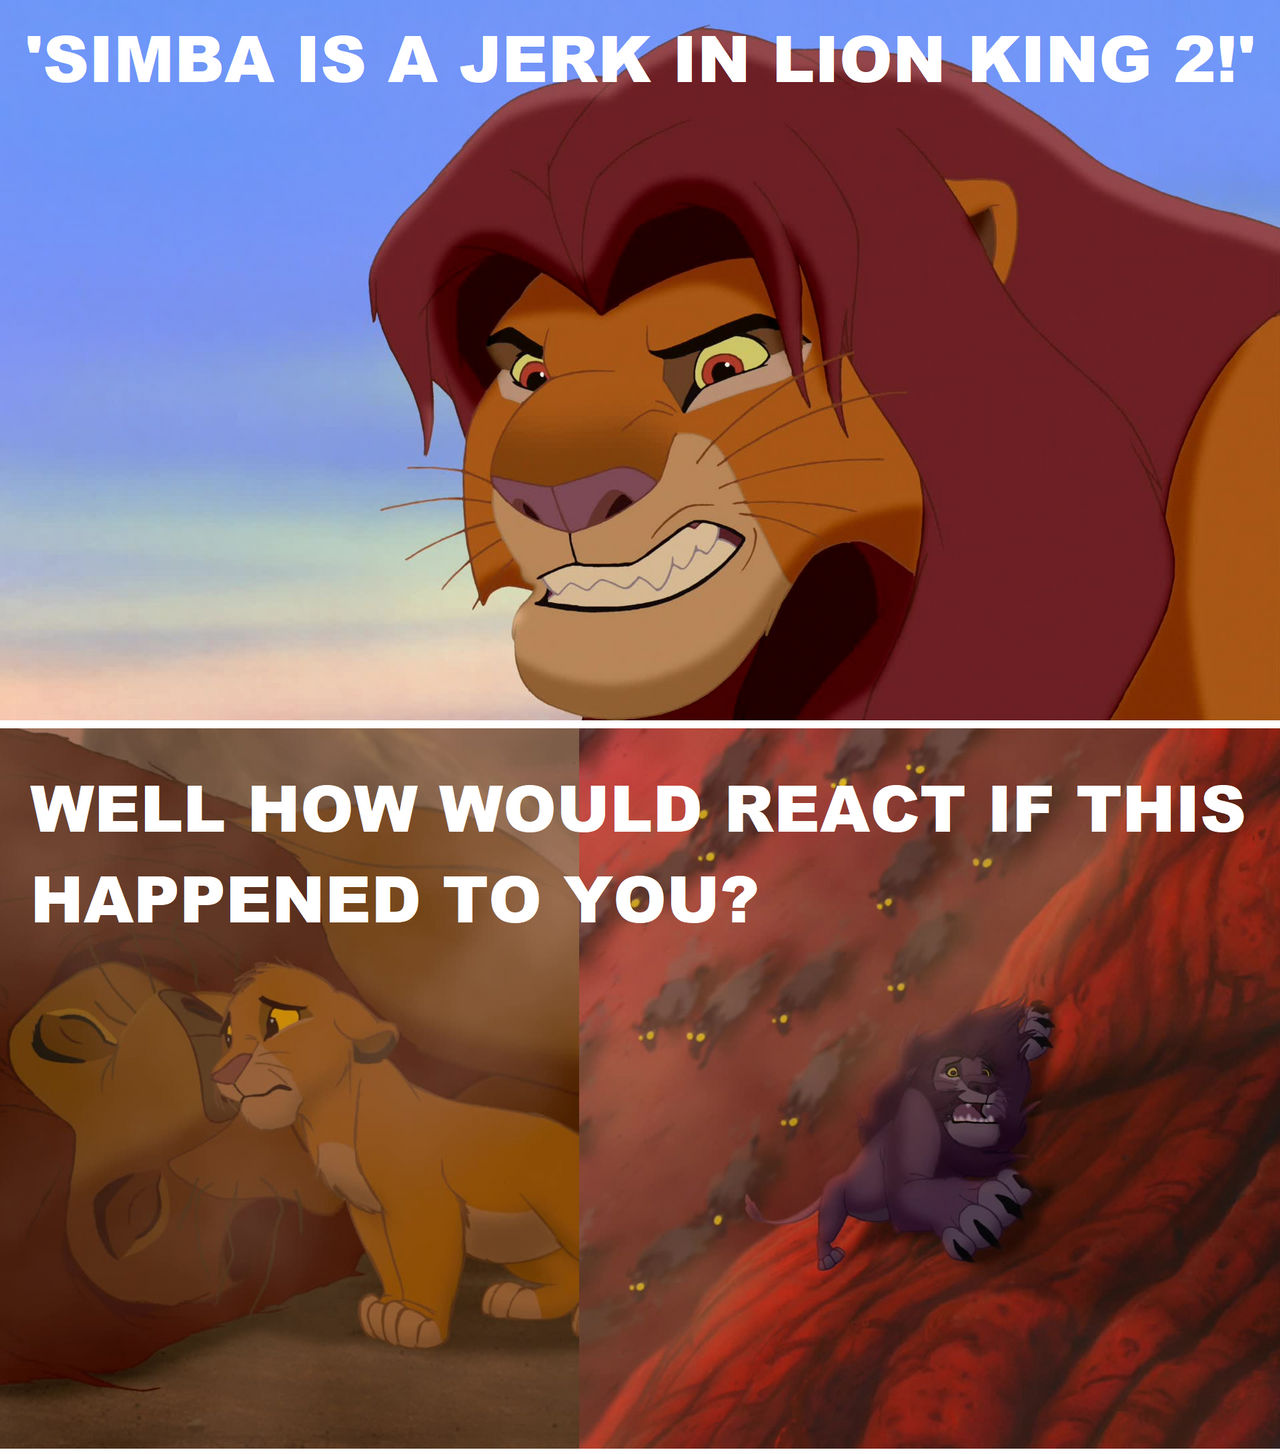 Simba in Lion king 2 is Justified by steeleaddict on DeviantArt